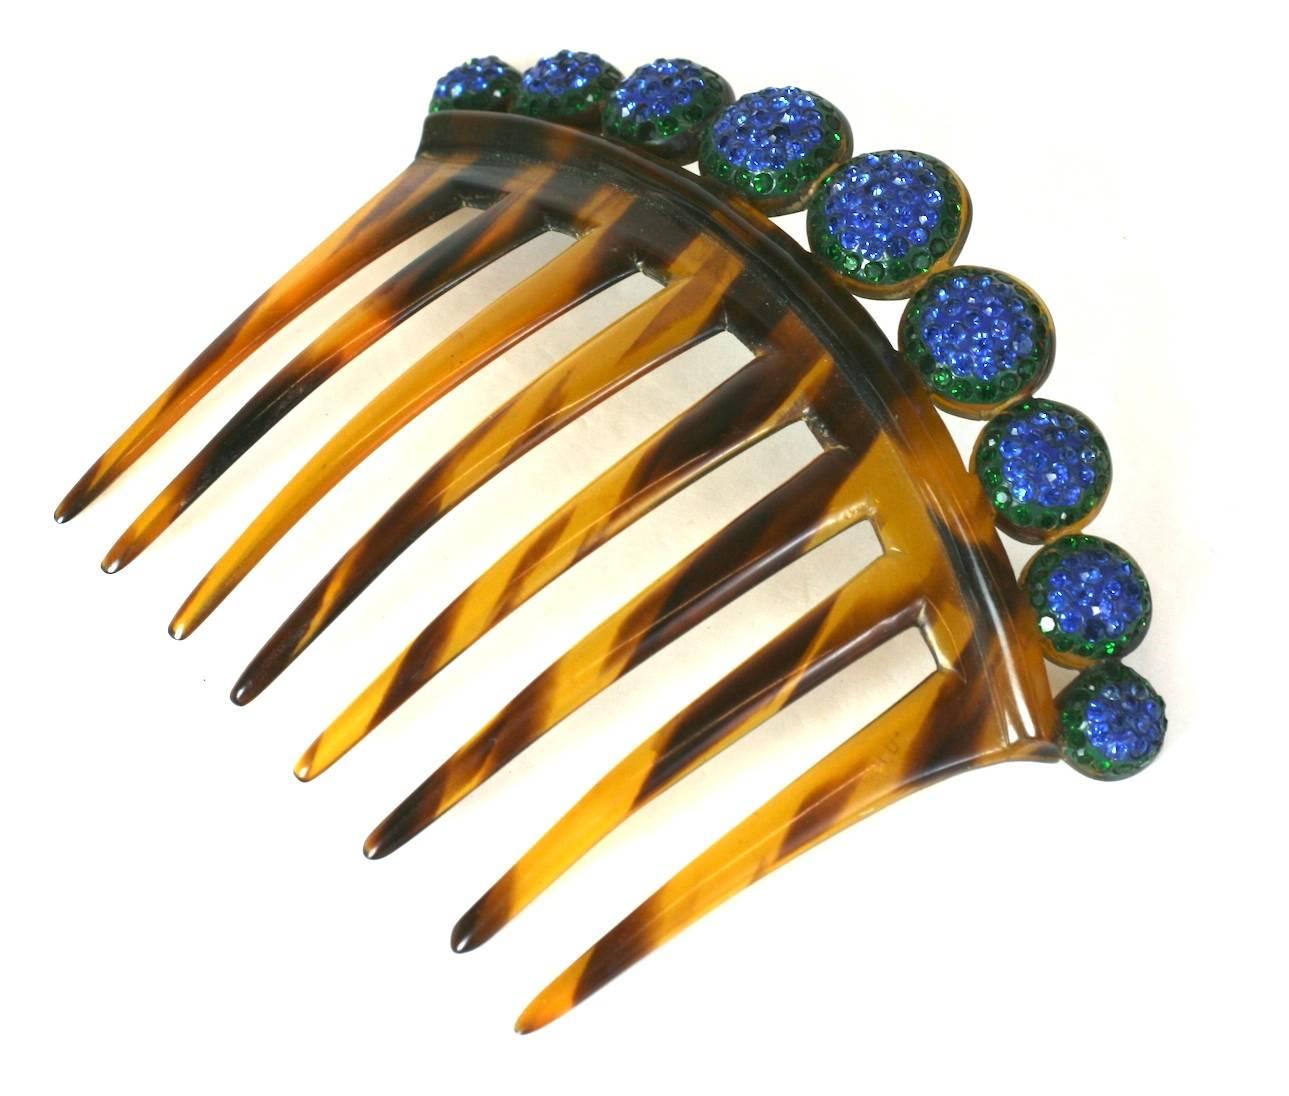 Art Deco Pave Ball Comb form the 1920's. Graduated half spheres are pave set with emerald and sapphire paste stones on top of a faux tortoiseshell comb.
1920's USA. 5" x 4" high.
Excellent condition. 